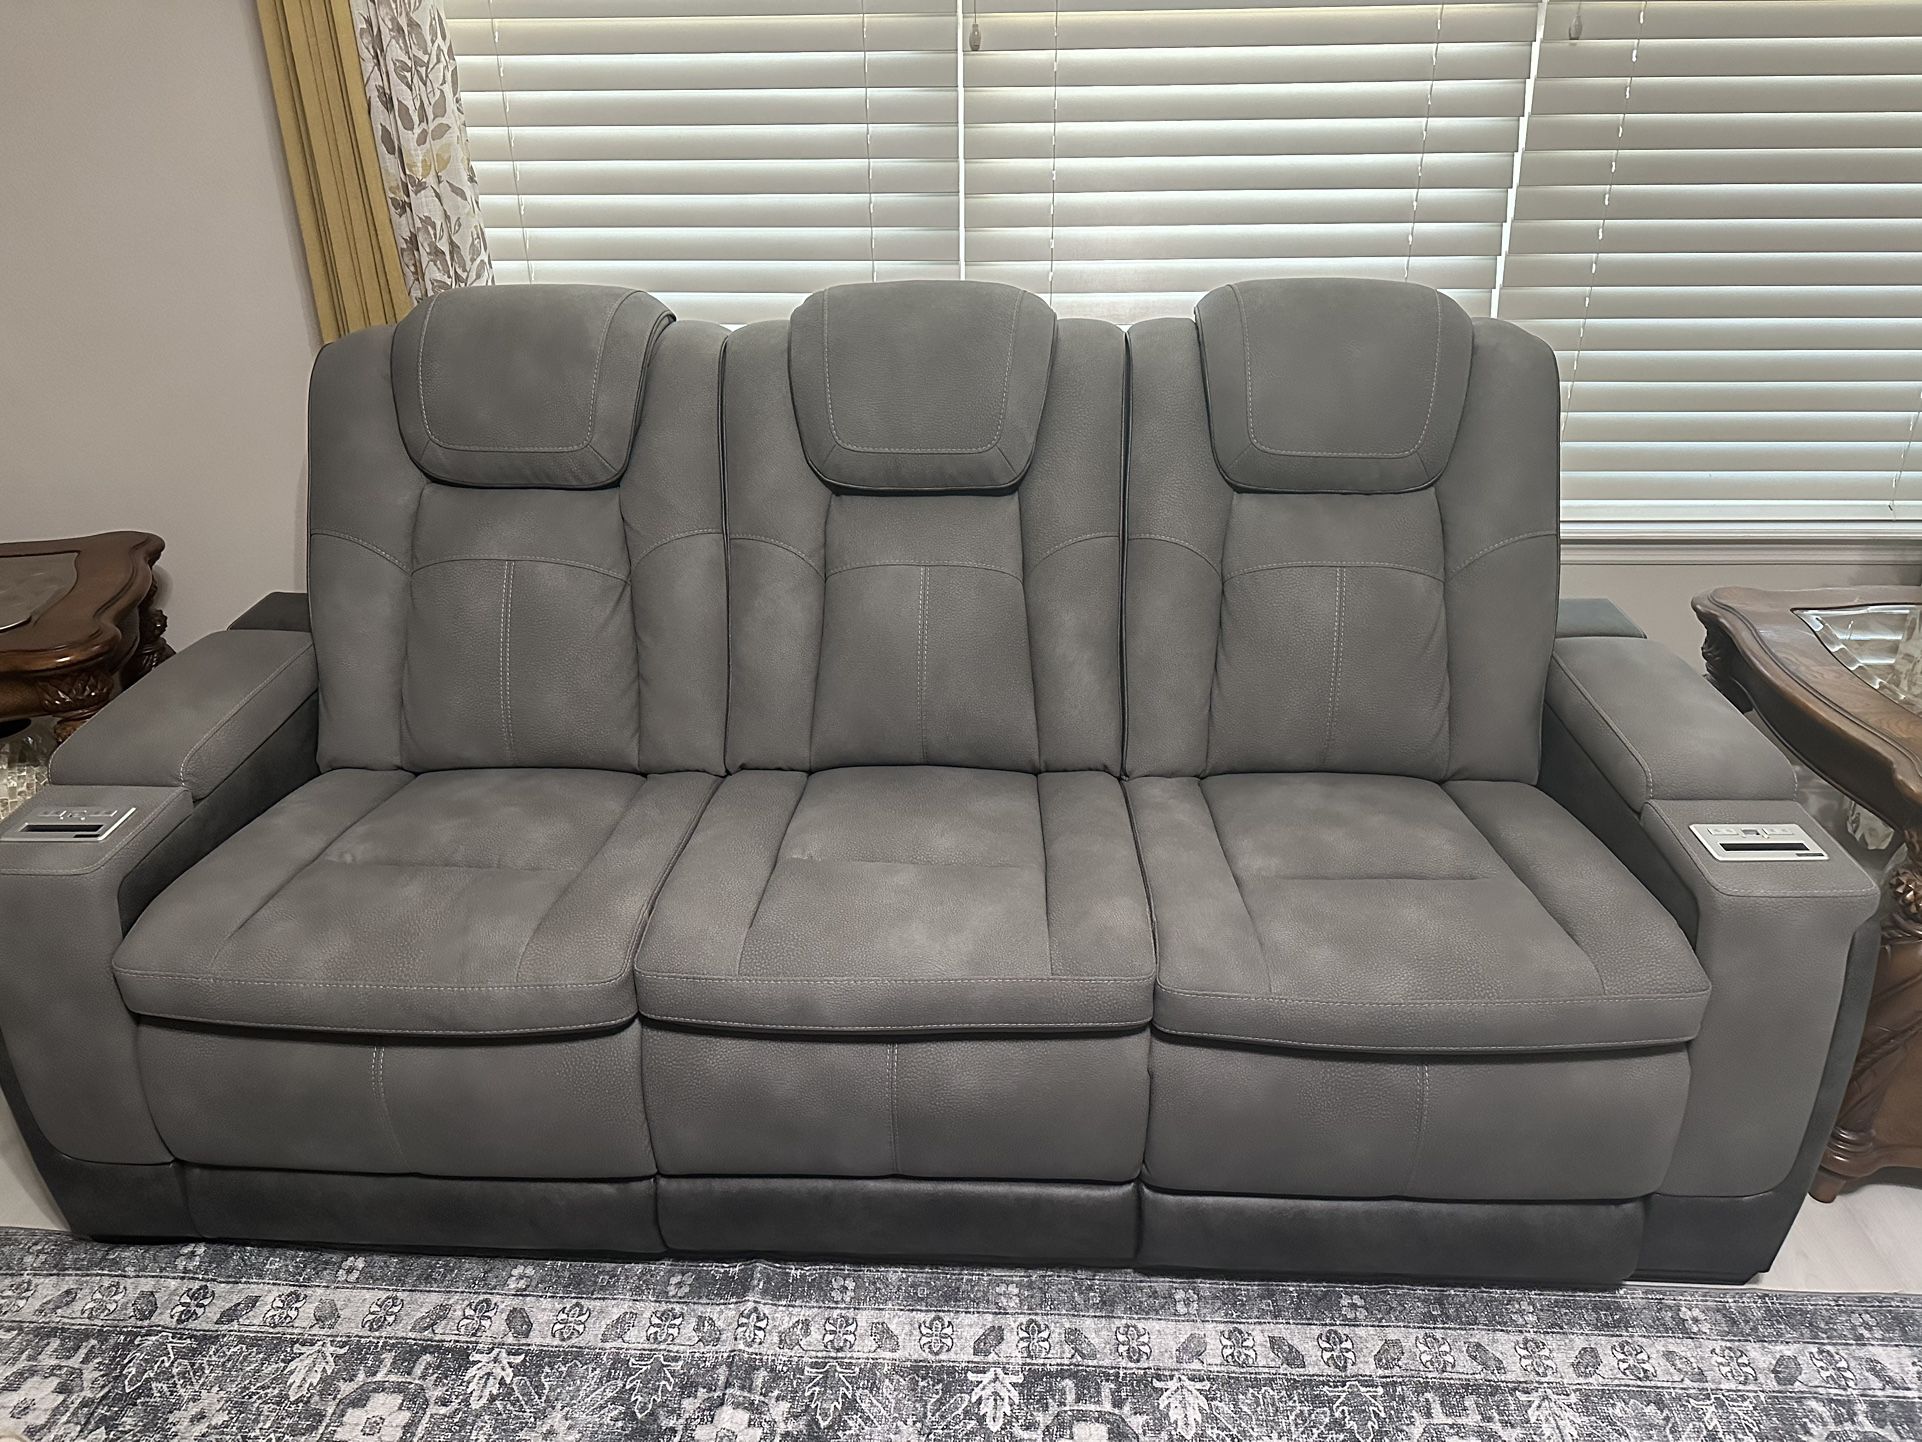 Two Recliner Sofas set